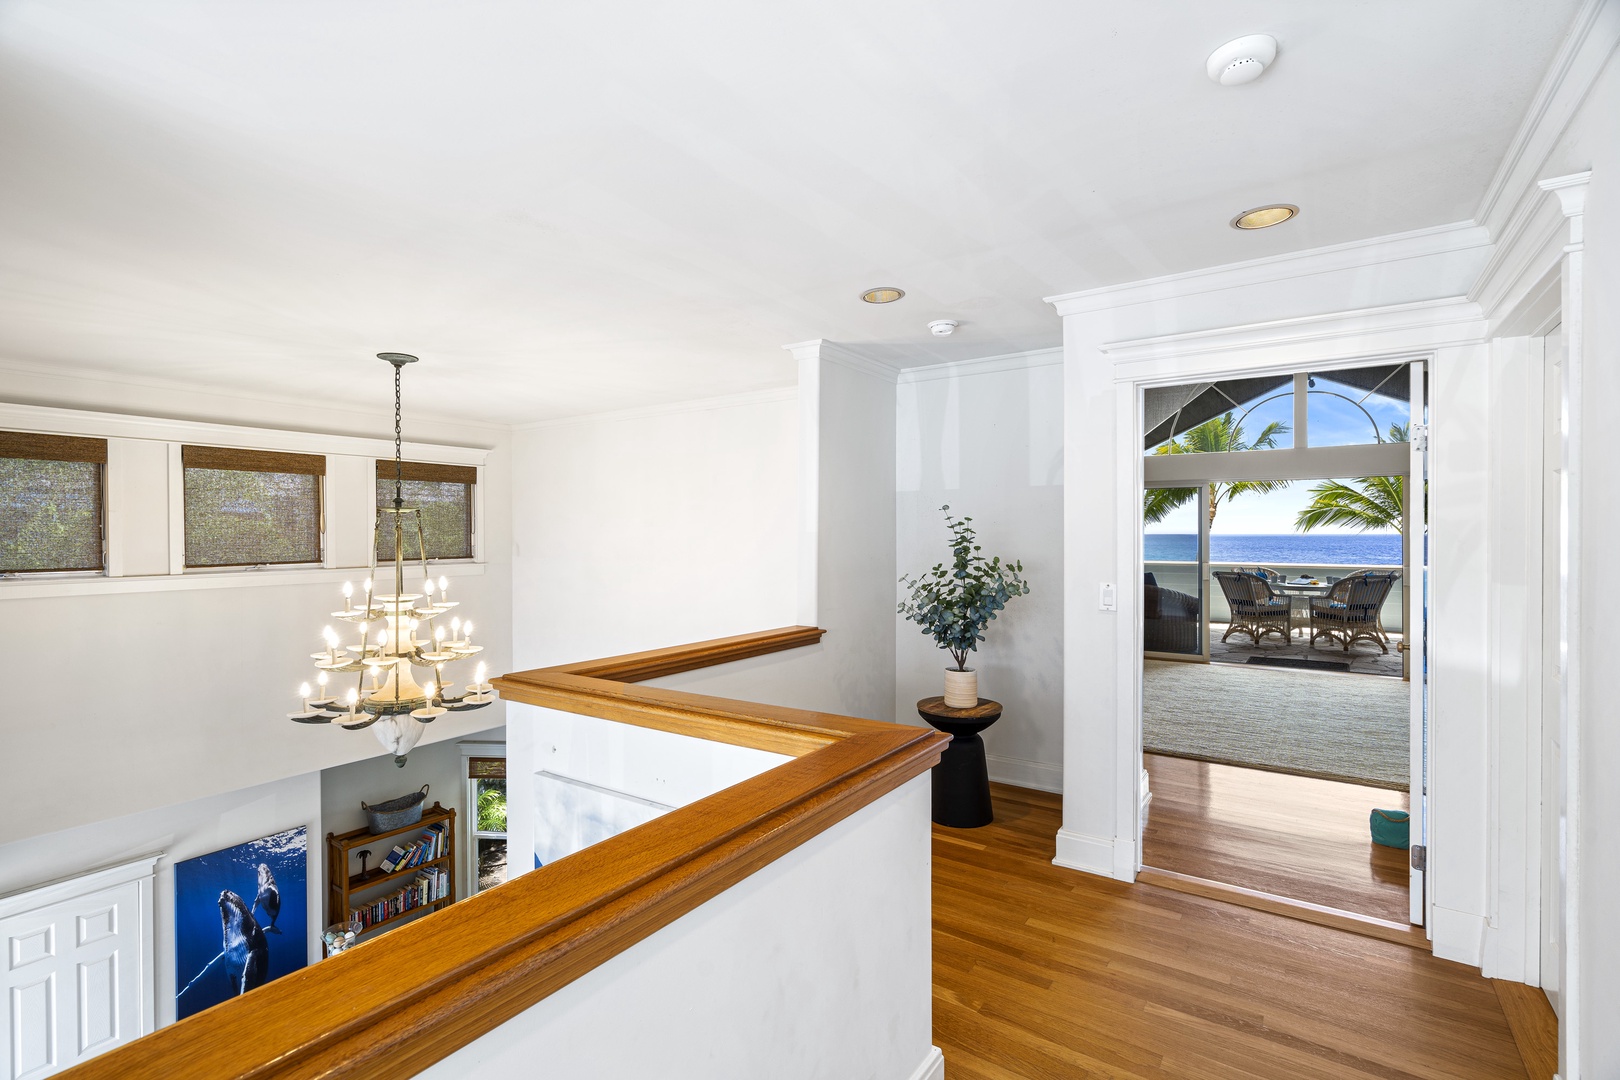 Kailua Kona Vacation Rentals, Kona Blue - Top of the stairs facing into the Primary bedroom